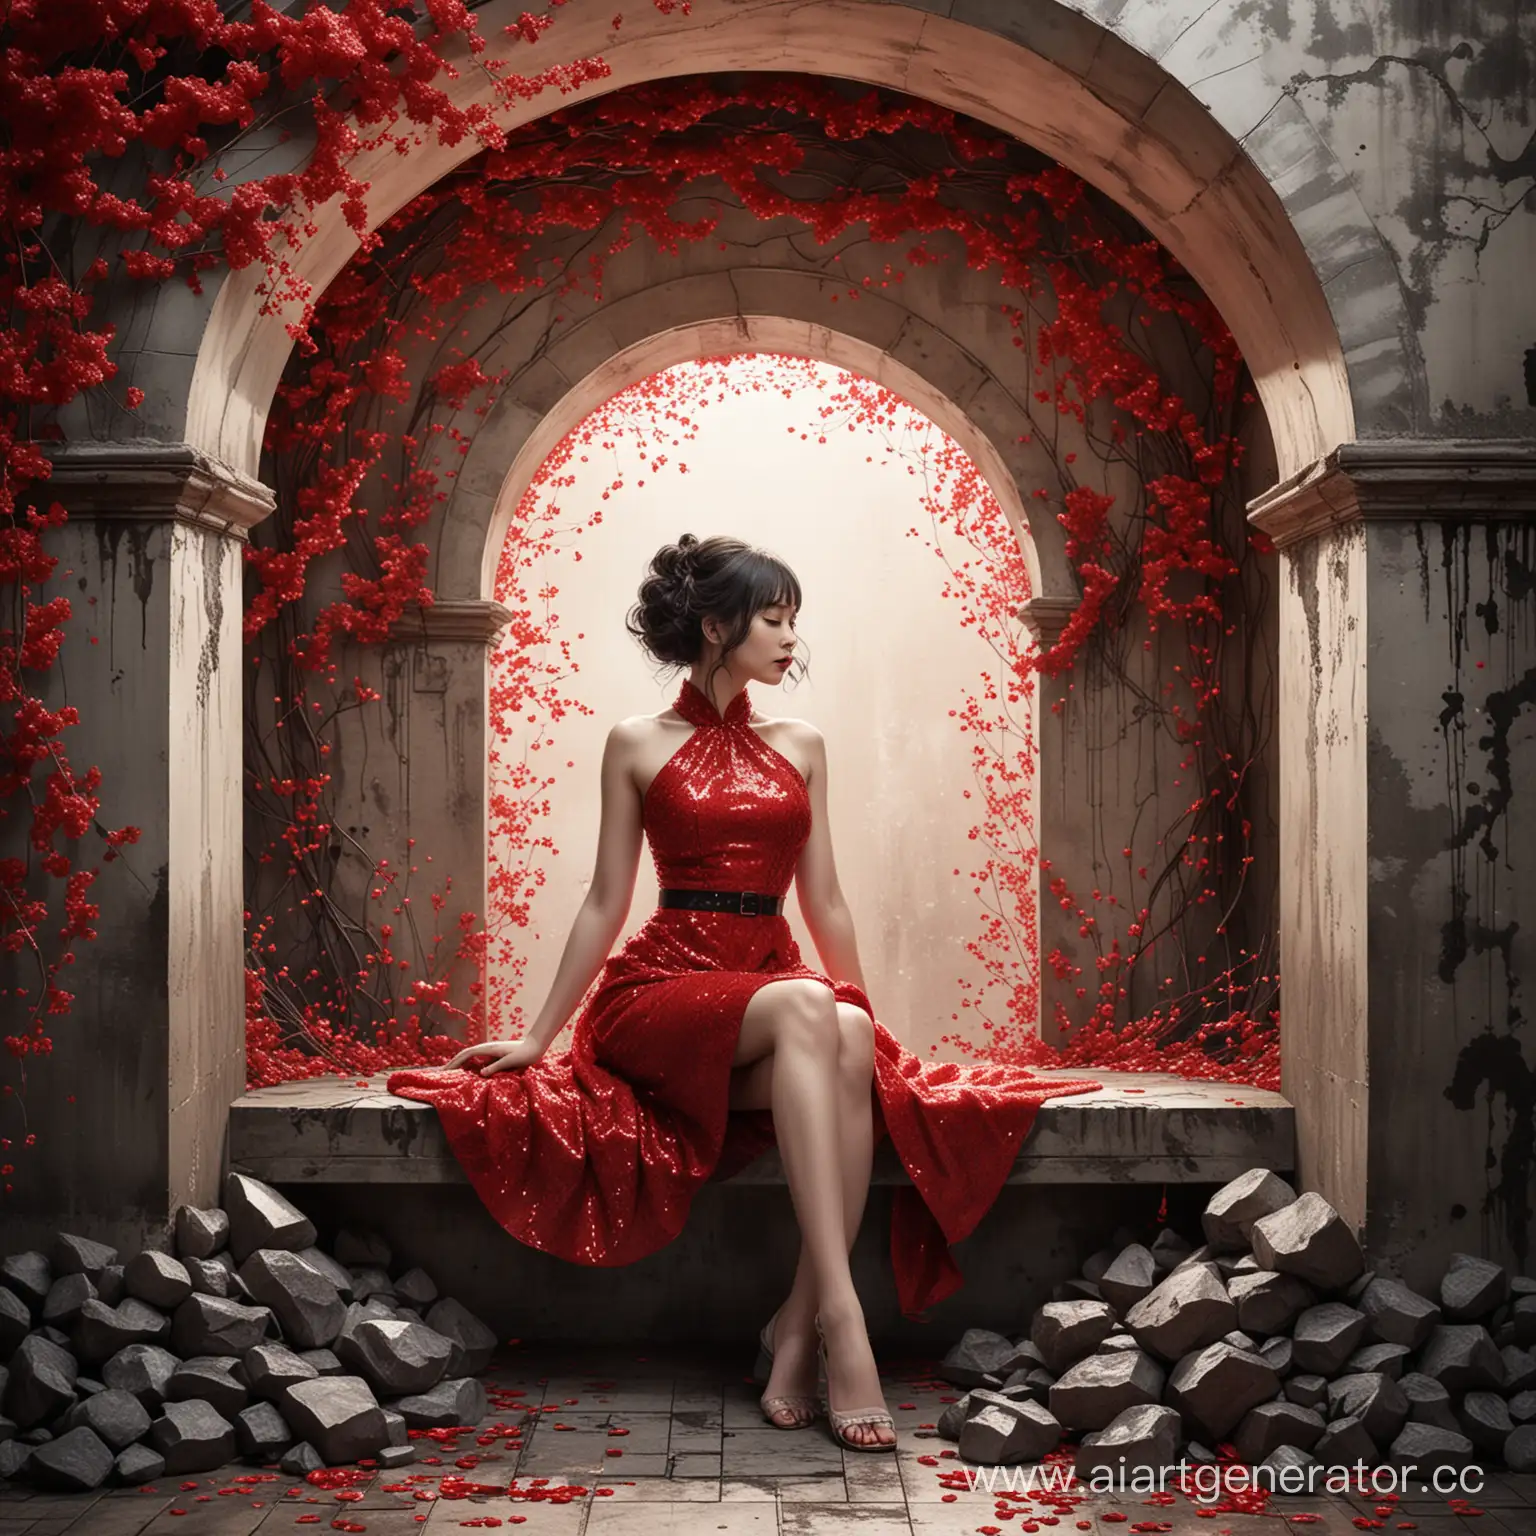 Dark comic style illustration with a theme of dark spring and kawaii elements, a woman adorned in a red sequins dress occupies a dynamic pose, sitting against an arch-tunnel backdrop, her head turned to the side, set against a grunge charcoal and off-white background, featuring triple exposure effects, her fingers perfectly rendered, and body idealized, executed in Japanese ink for immaculate composition, dynamic light and shadow play intensifying the hyper